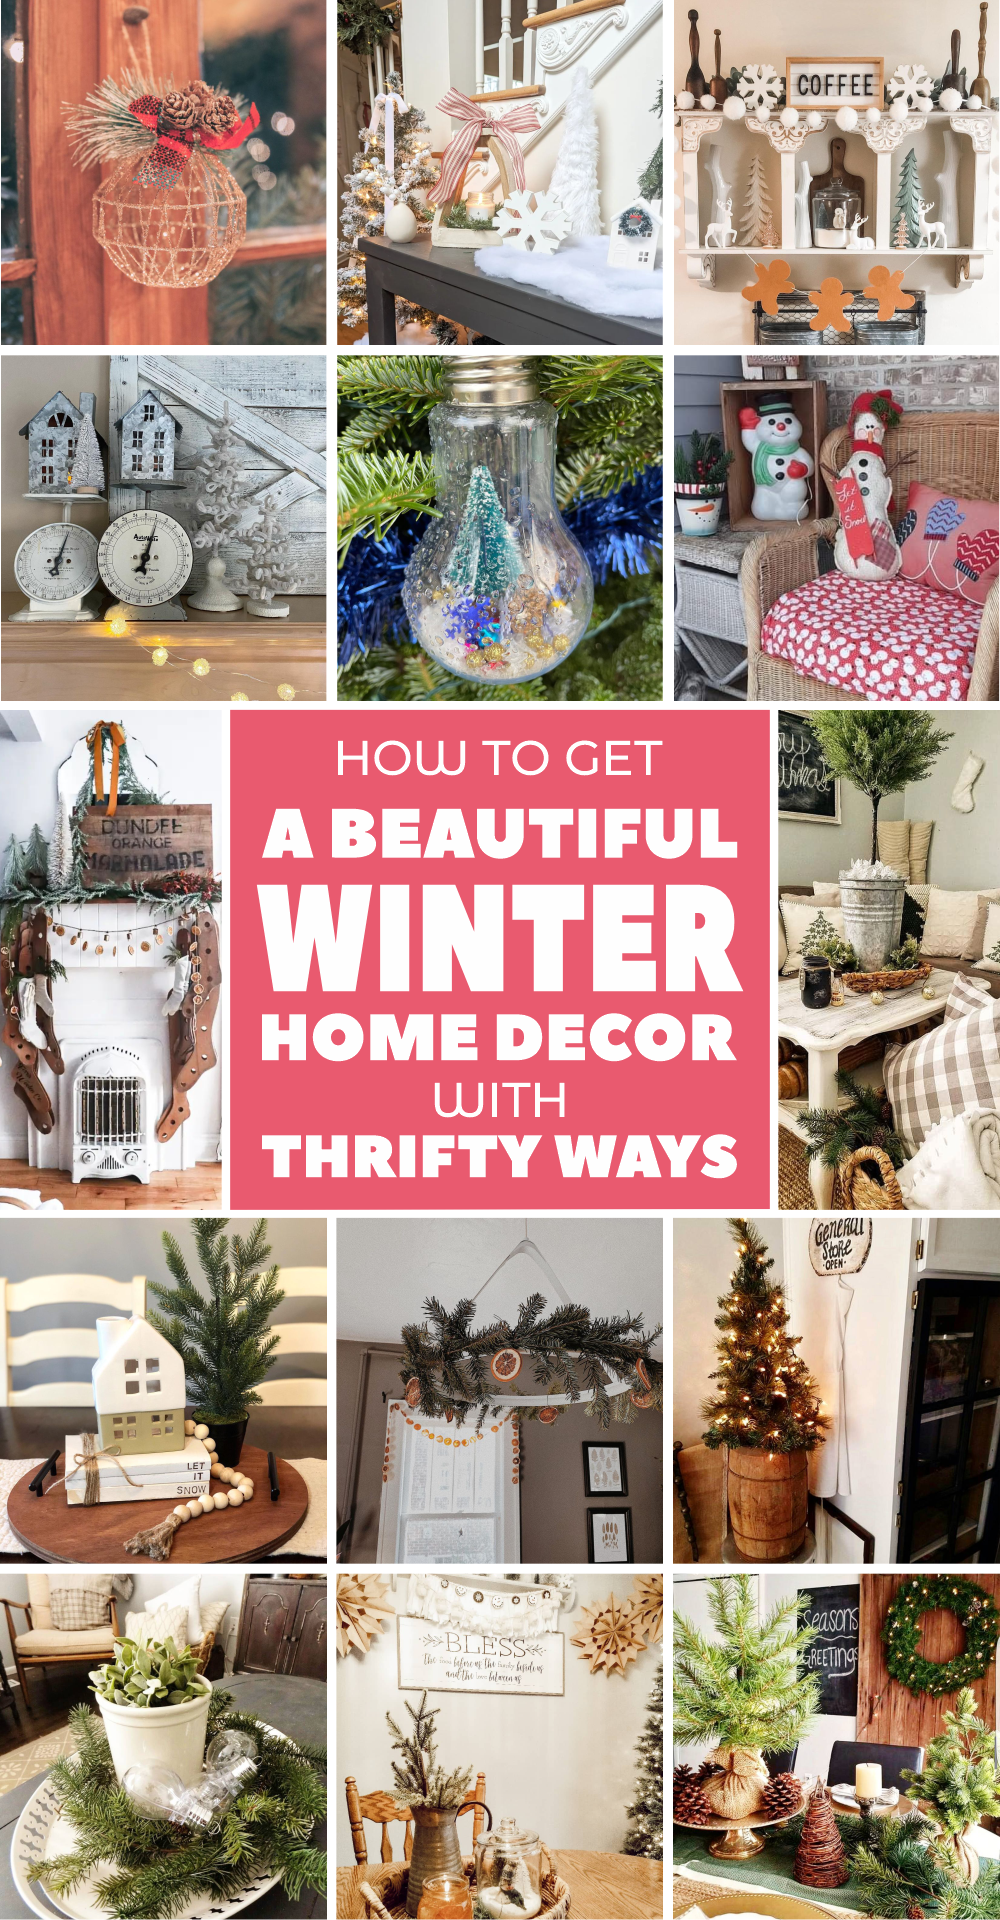 How to Get A Beautiful Winter Home Decor with Thrifty Ways